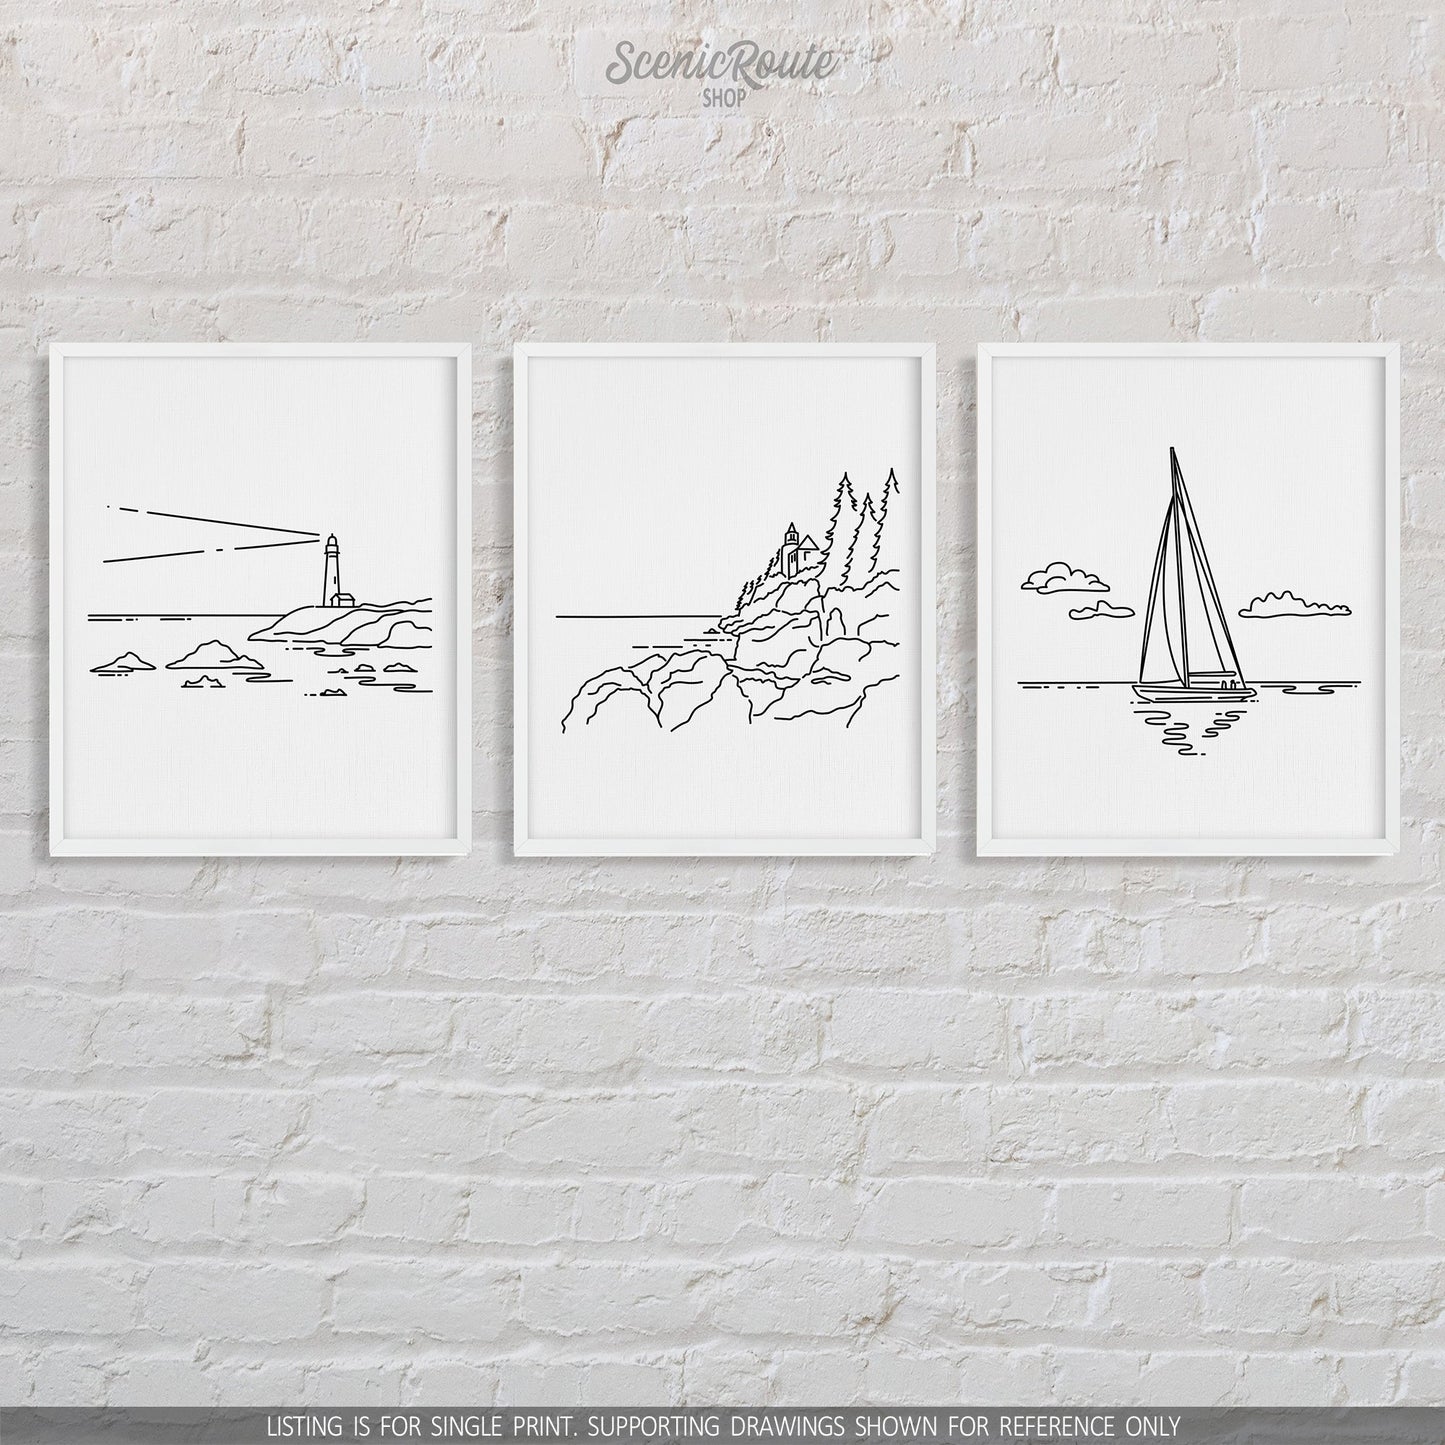 A group of three framed drawings on a brick wall. The line art drawings include a Lighthouse, Acadia National Park, and Sailing